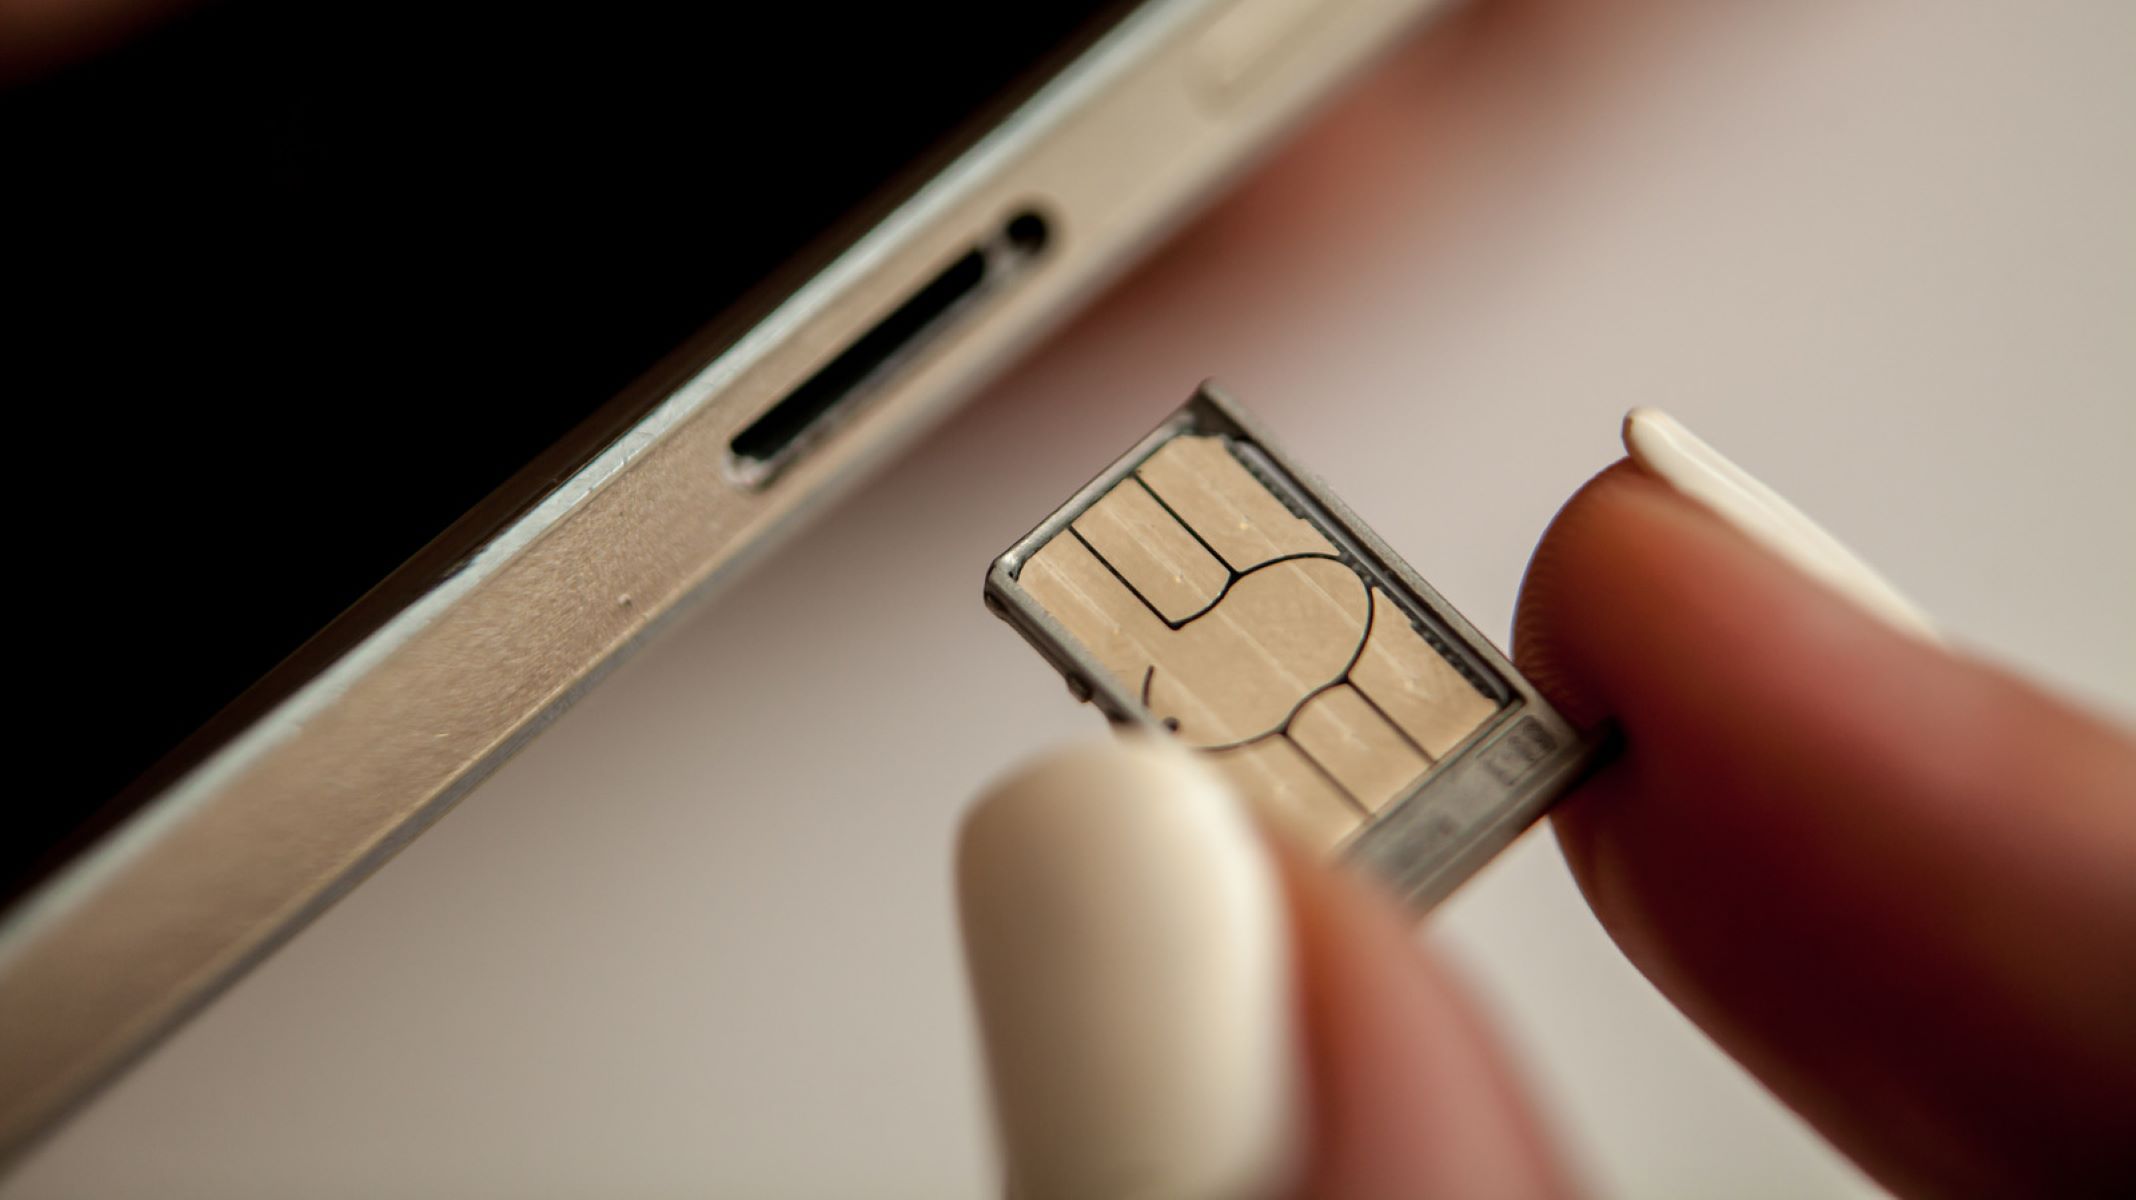 Opening SIM Card Without Tool: Quick Tips